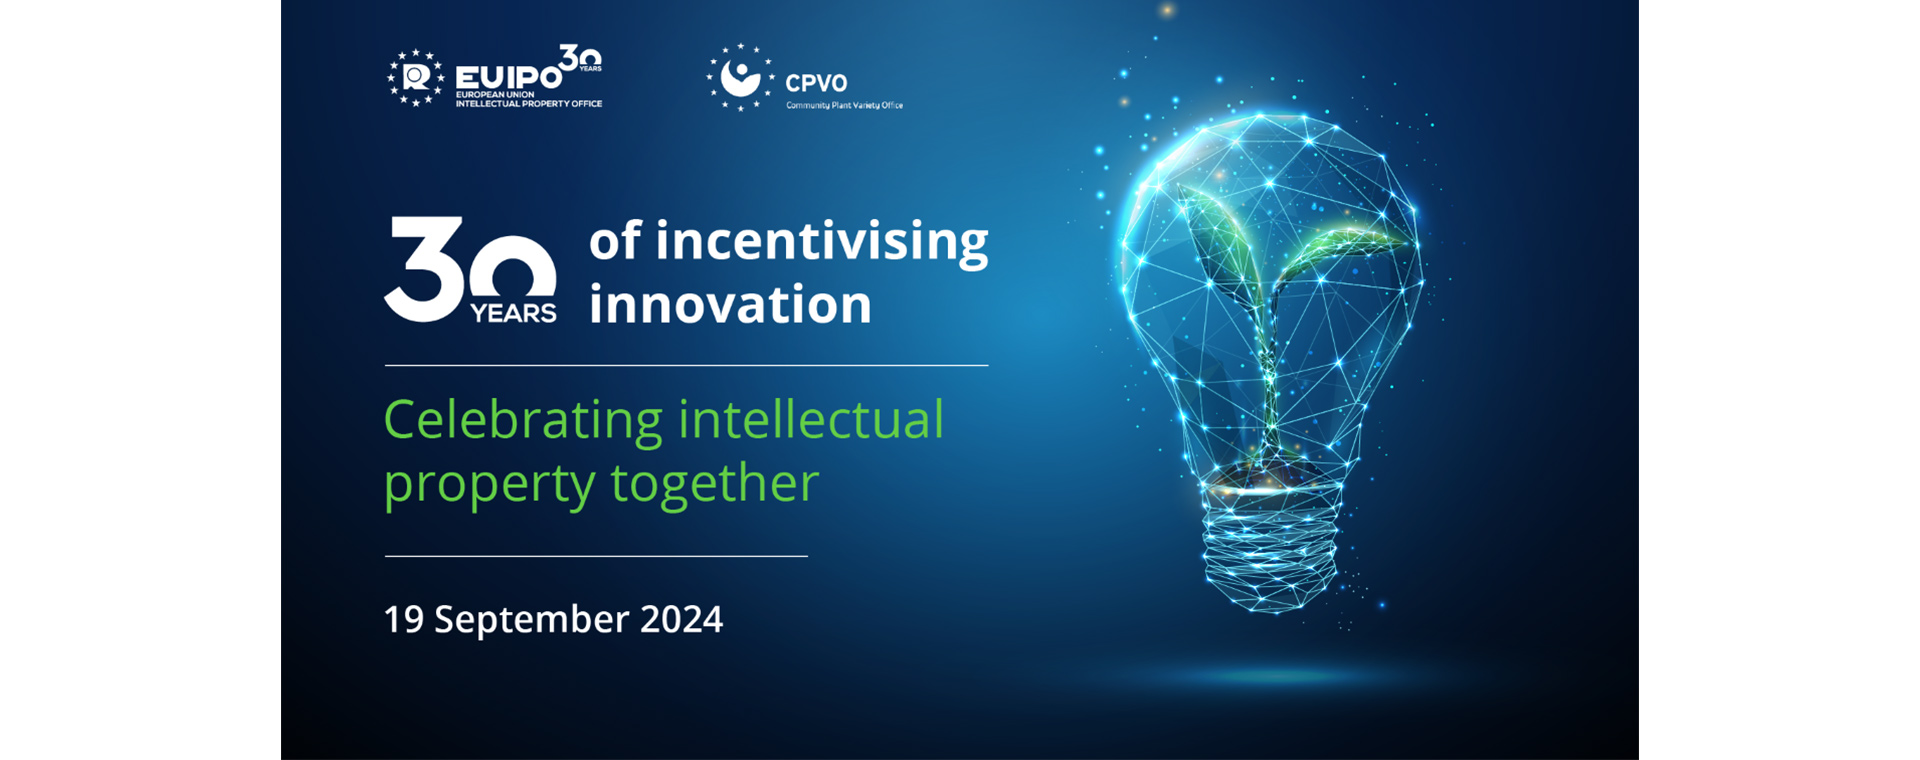 Seminar: "30 years of incentivising innovation" a CPVO-EUIPO Joint Event